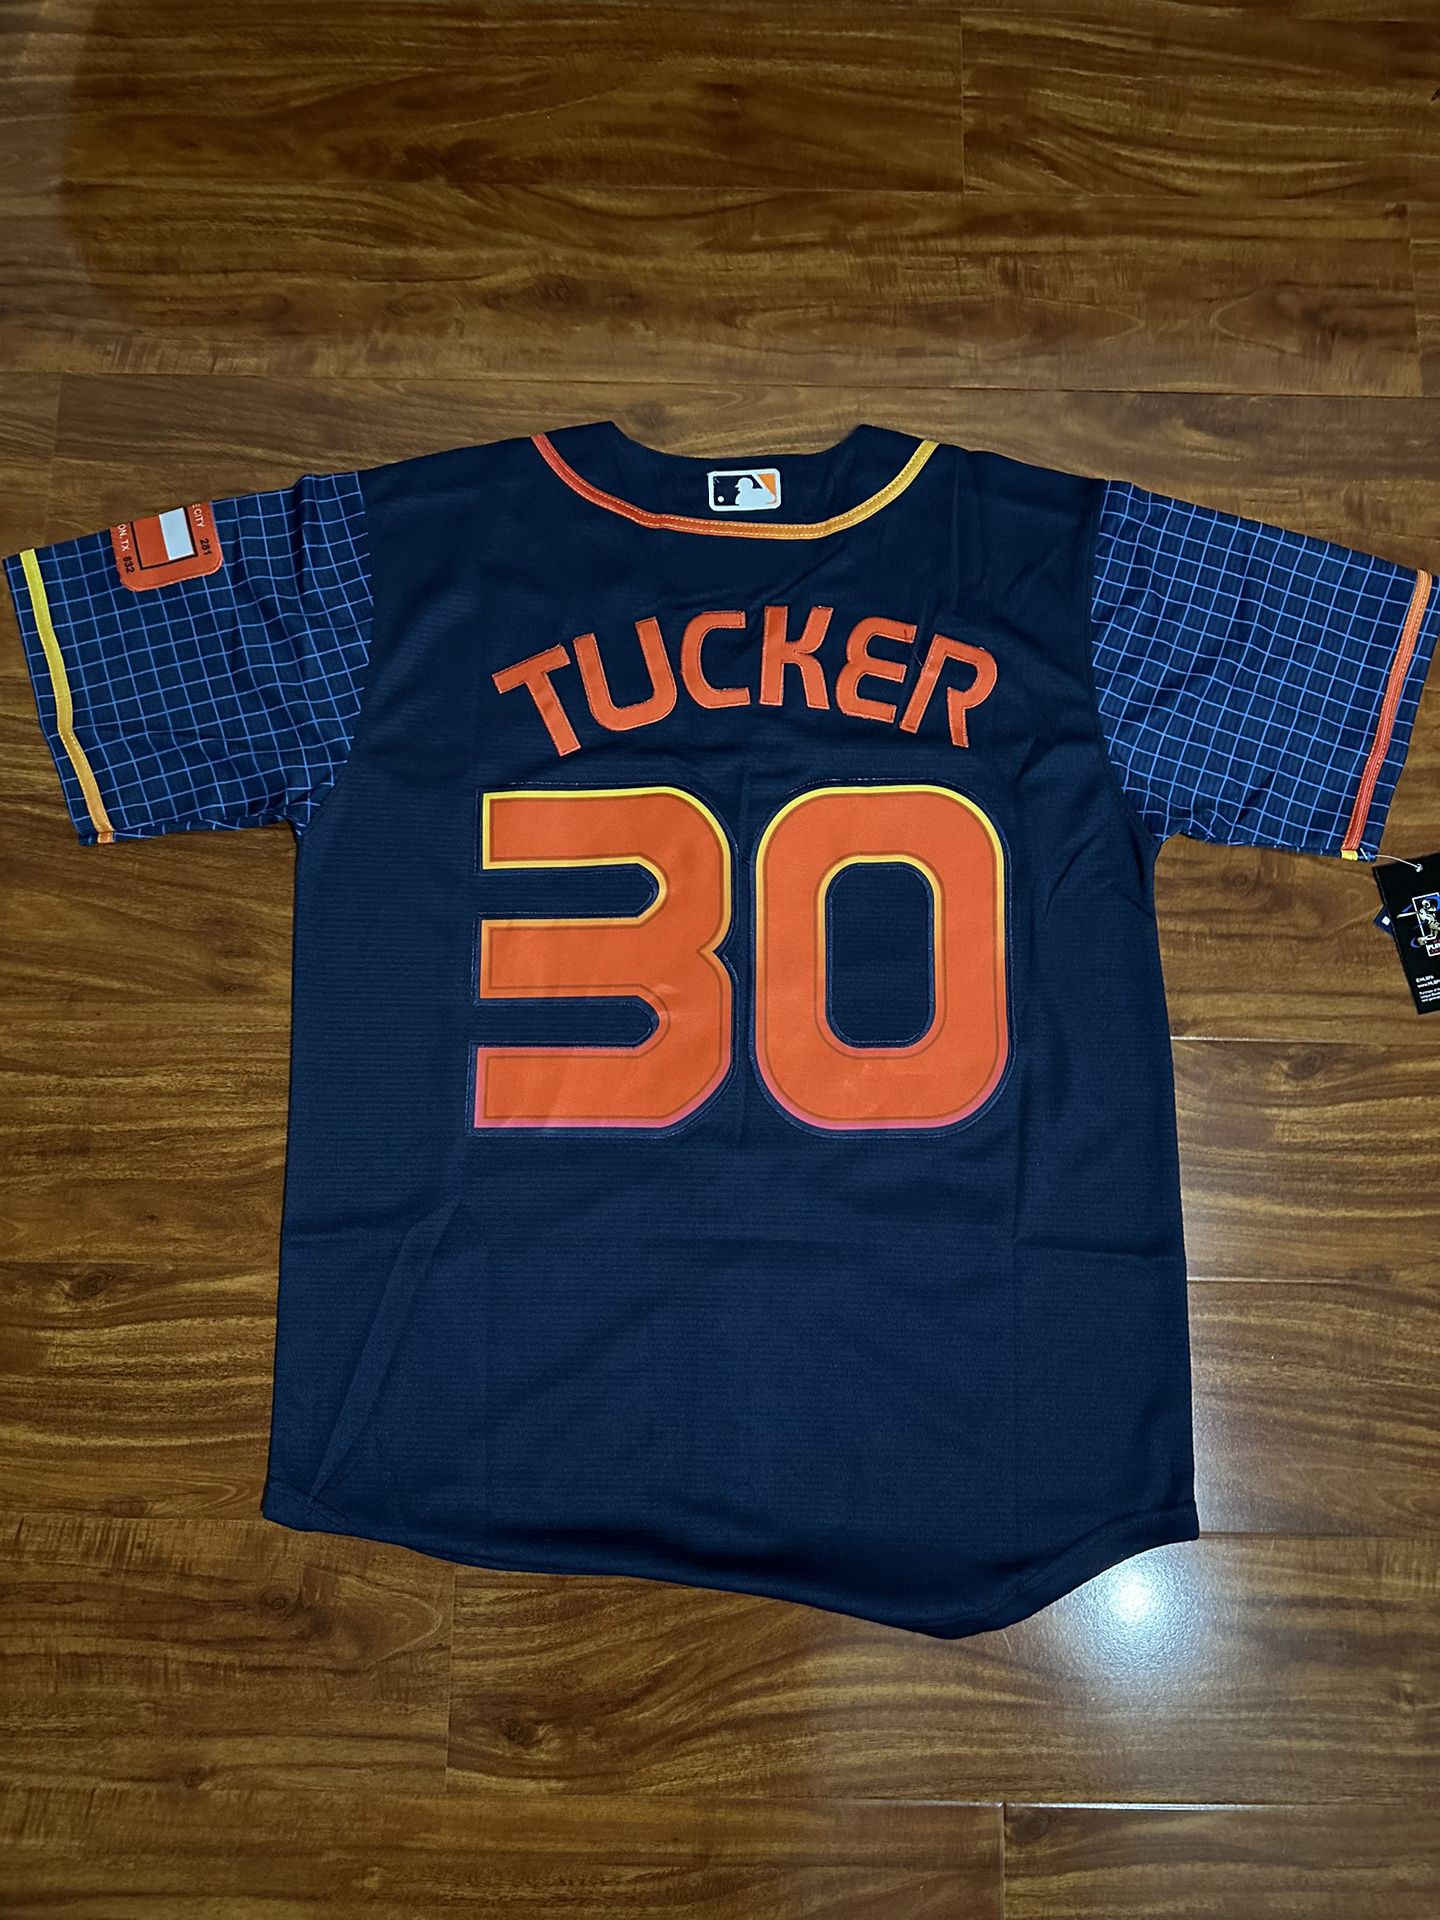 Astros PENA Jersey for Sale in Port Isabel, TX - OfferUp